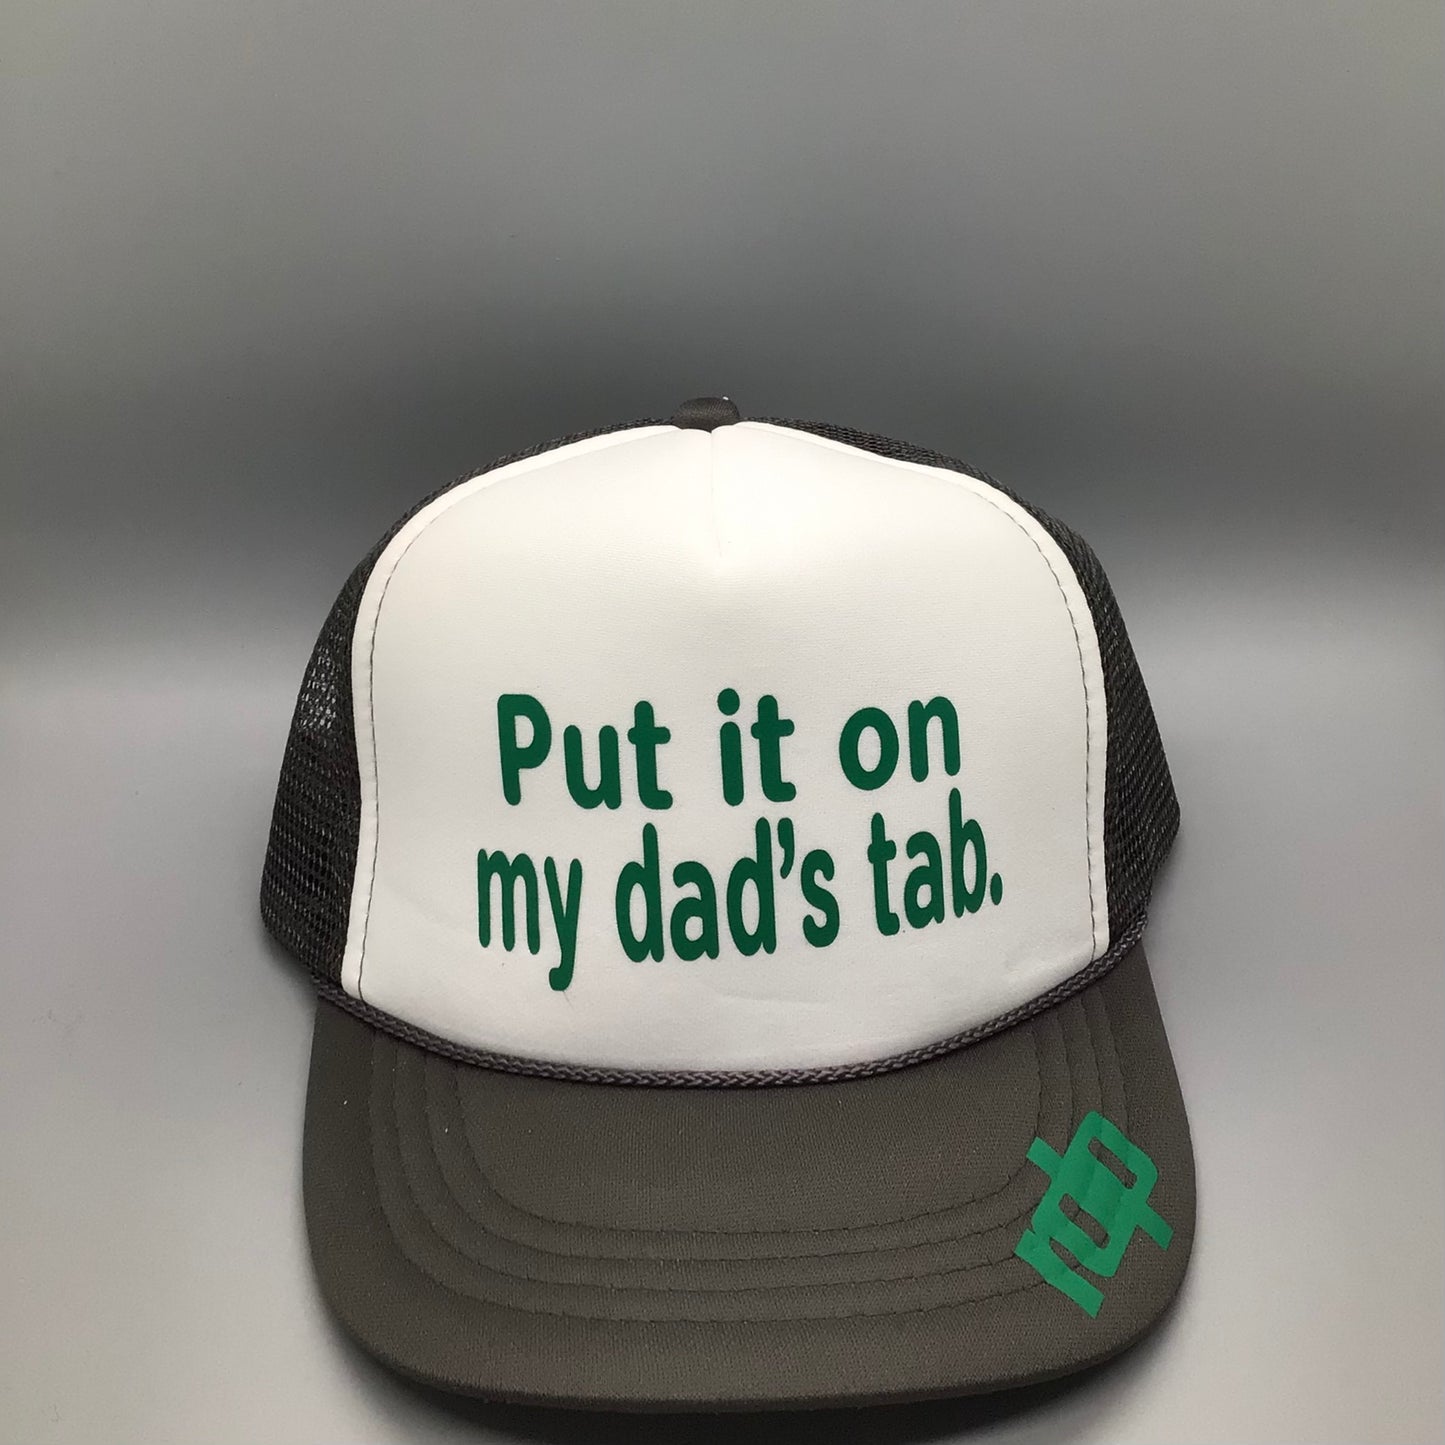 Youth "Put it on my dad's tab"